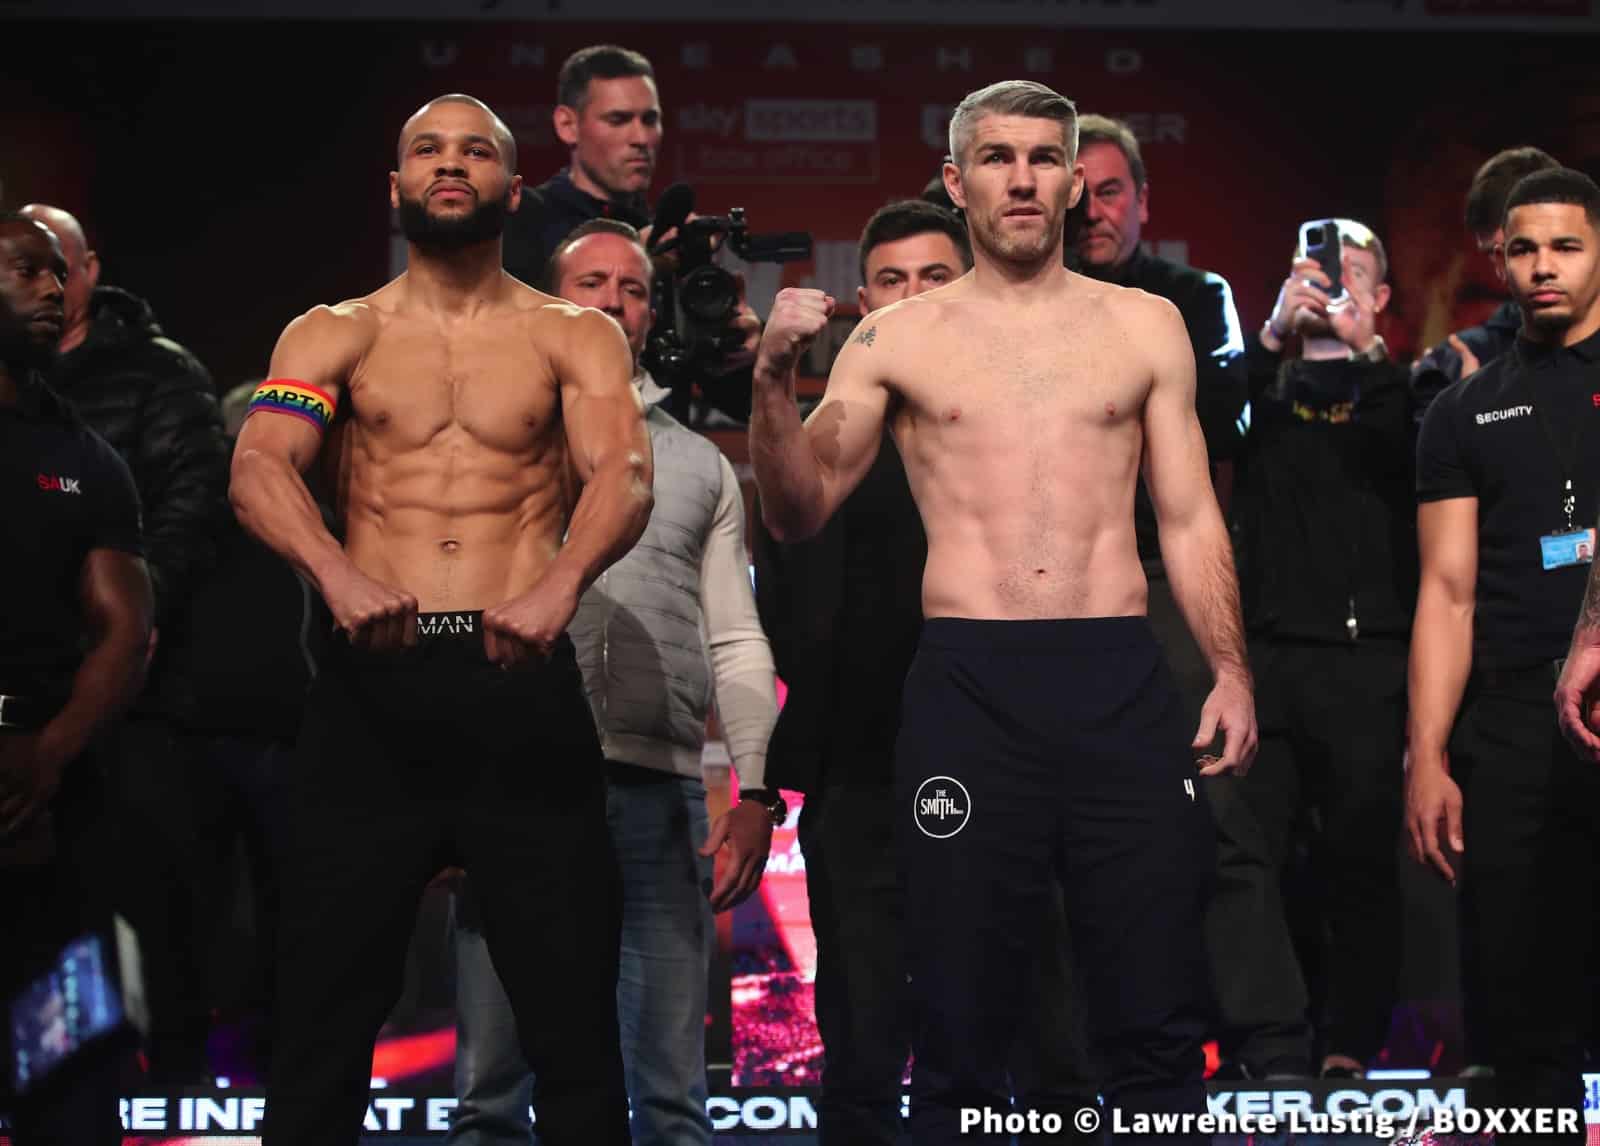 Image: Eubank Jr wears rainbow armband at weigh-in with Smith